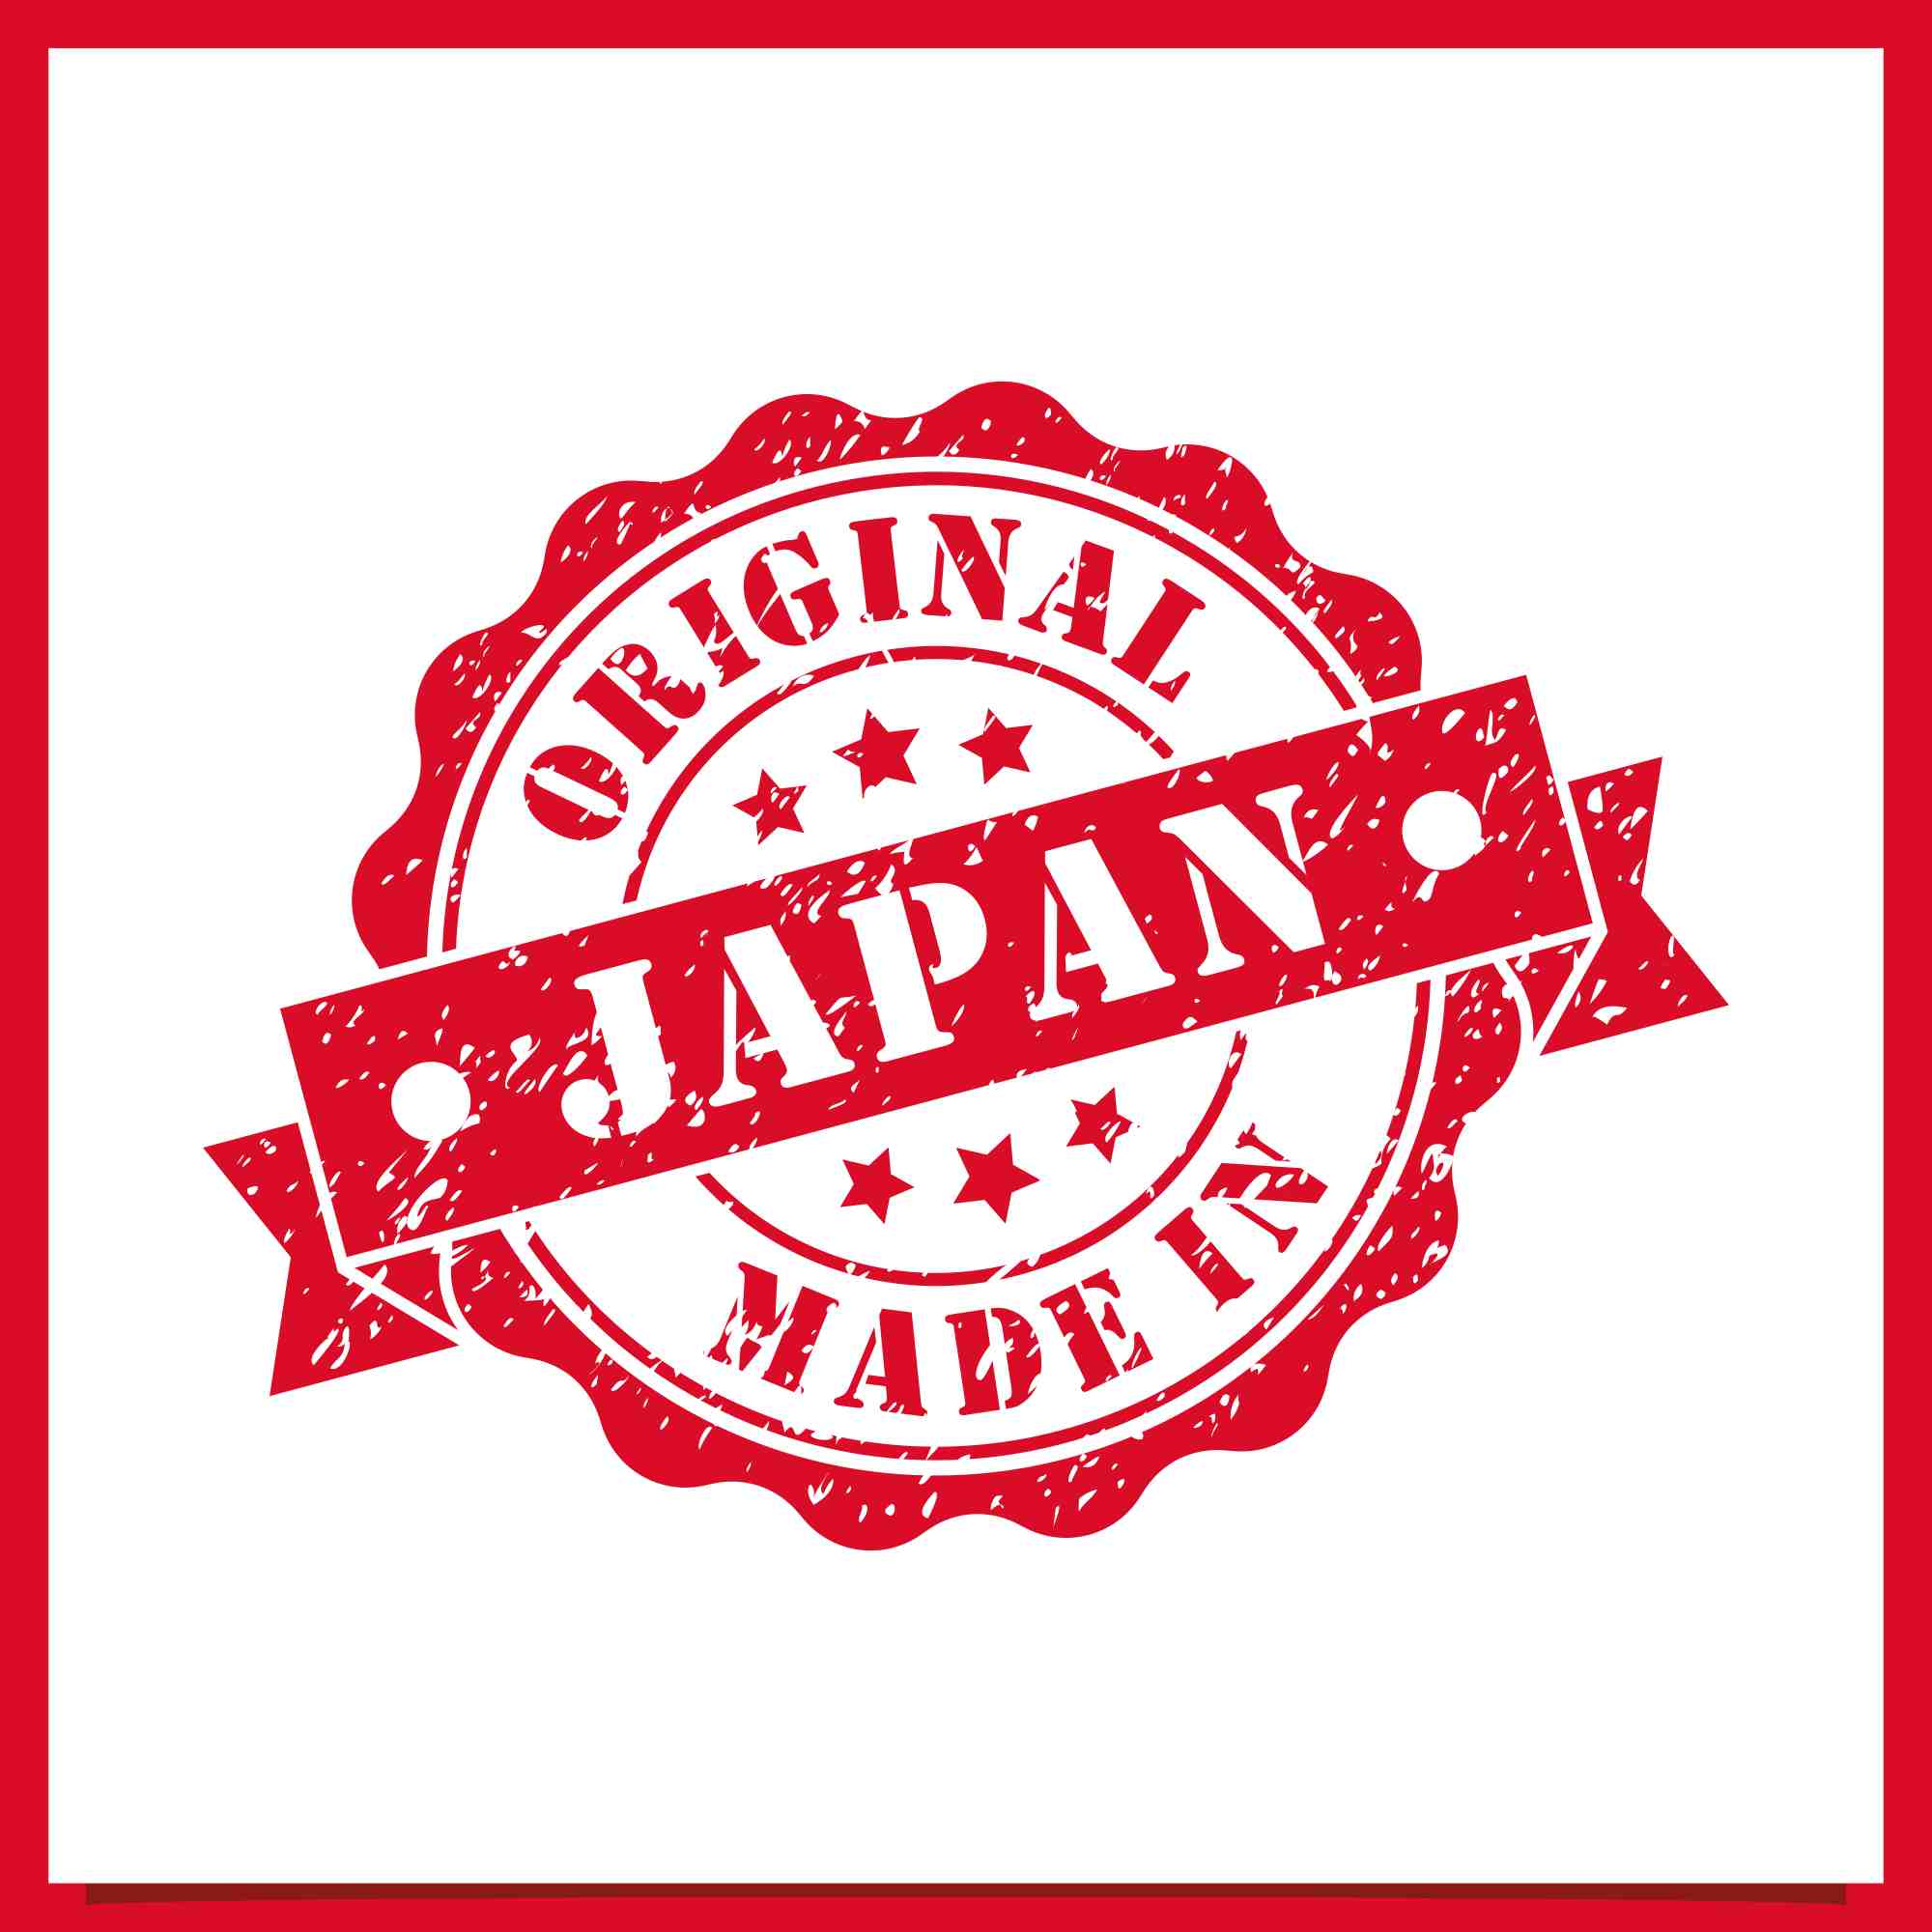 Wlcome to Japan stamps logo design collection - $4 preview image.